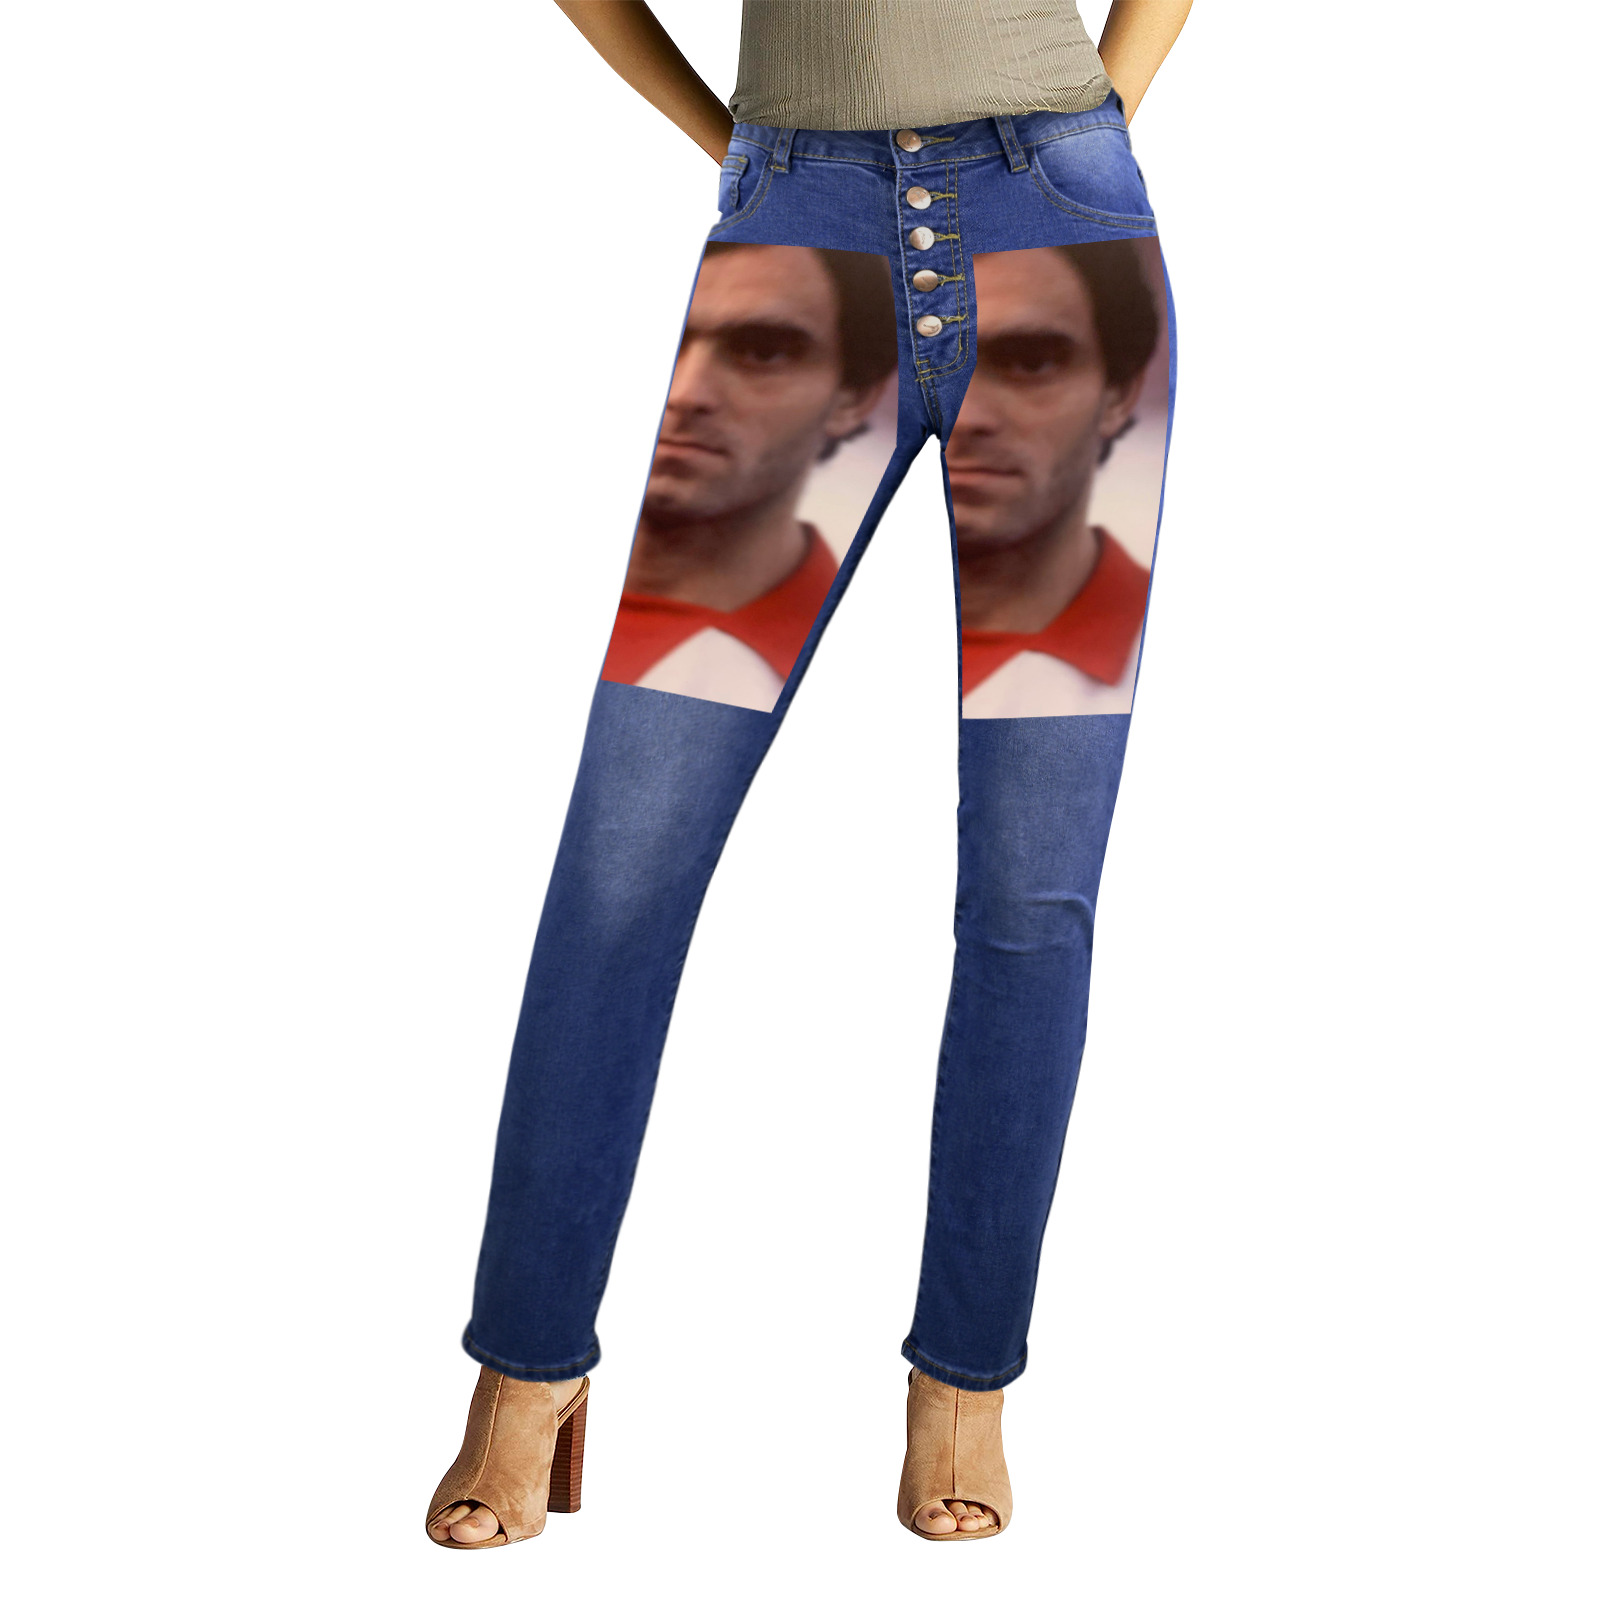 mesny. Women's Jeans (Front&Back Printing)